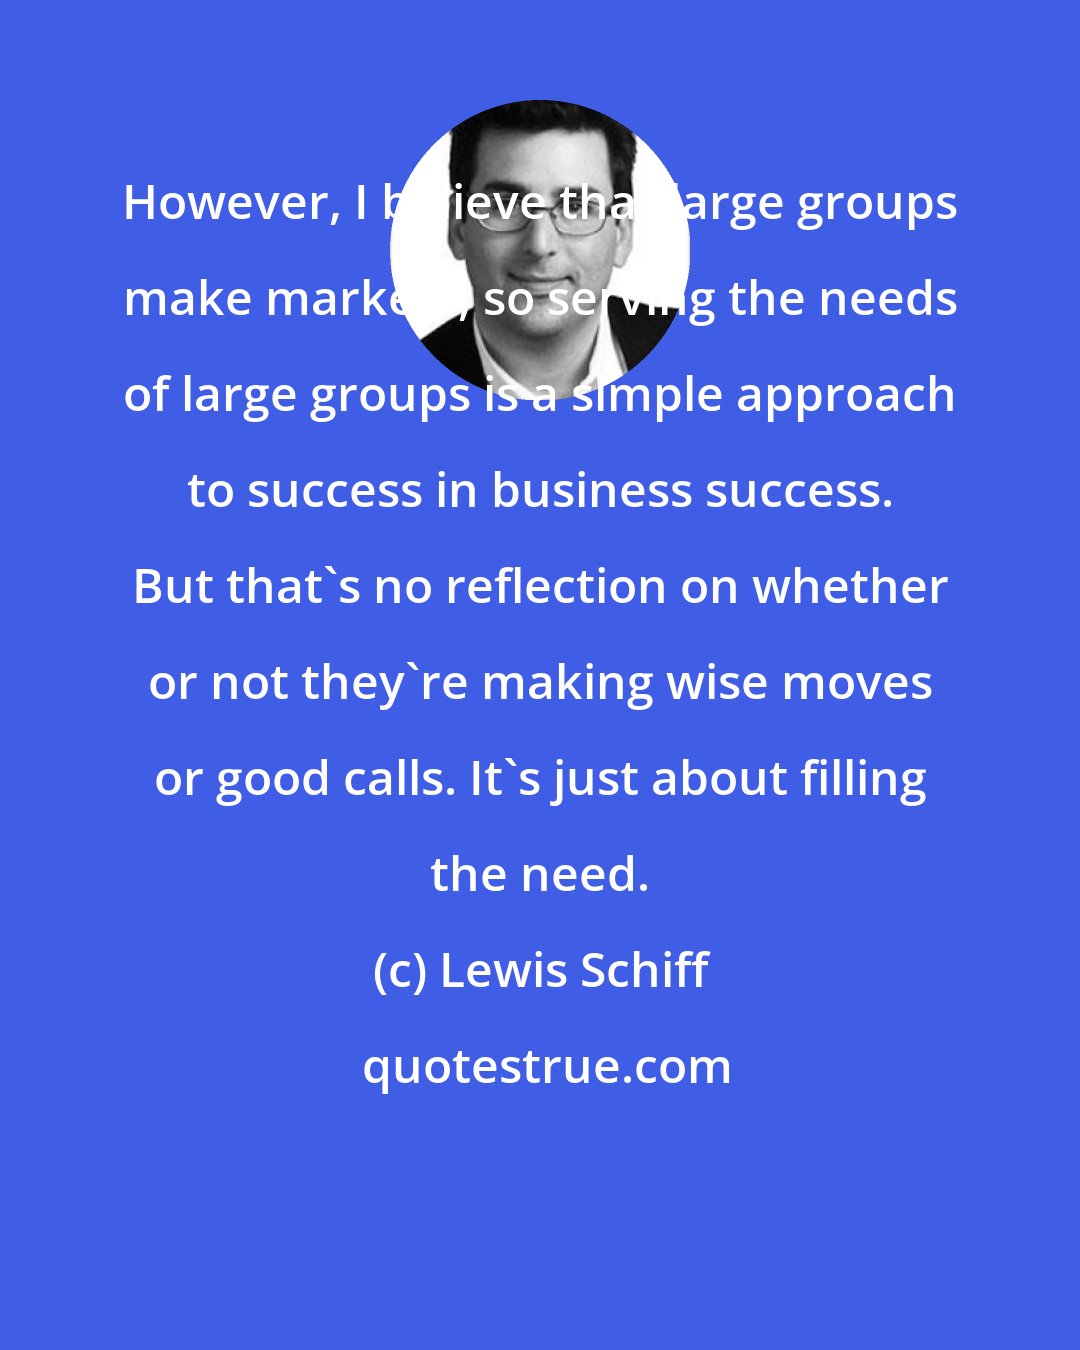 Lewis Schiff: However, I believe that large groups make markets, so serving the needs of large groups is a simple approach to success in business success. But that's no reflection on whether or not they're making wise moves or good calls. It's just about filling the need.